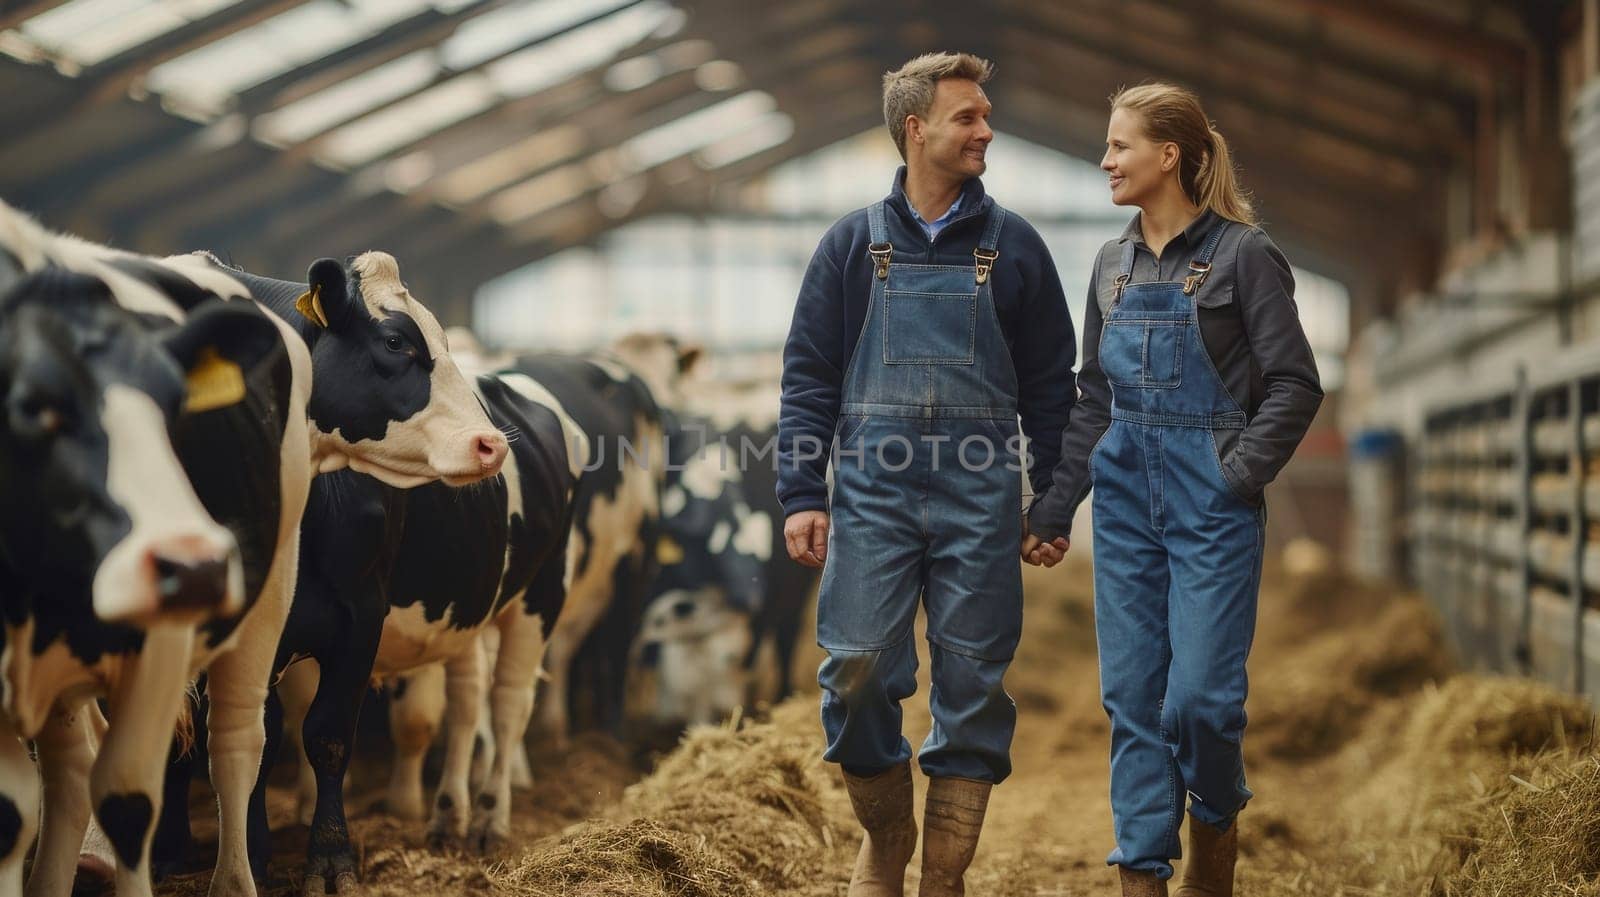 A man and woman are walking through a barn with cows by itchaznong